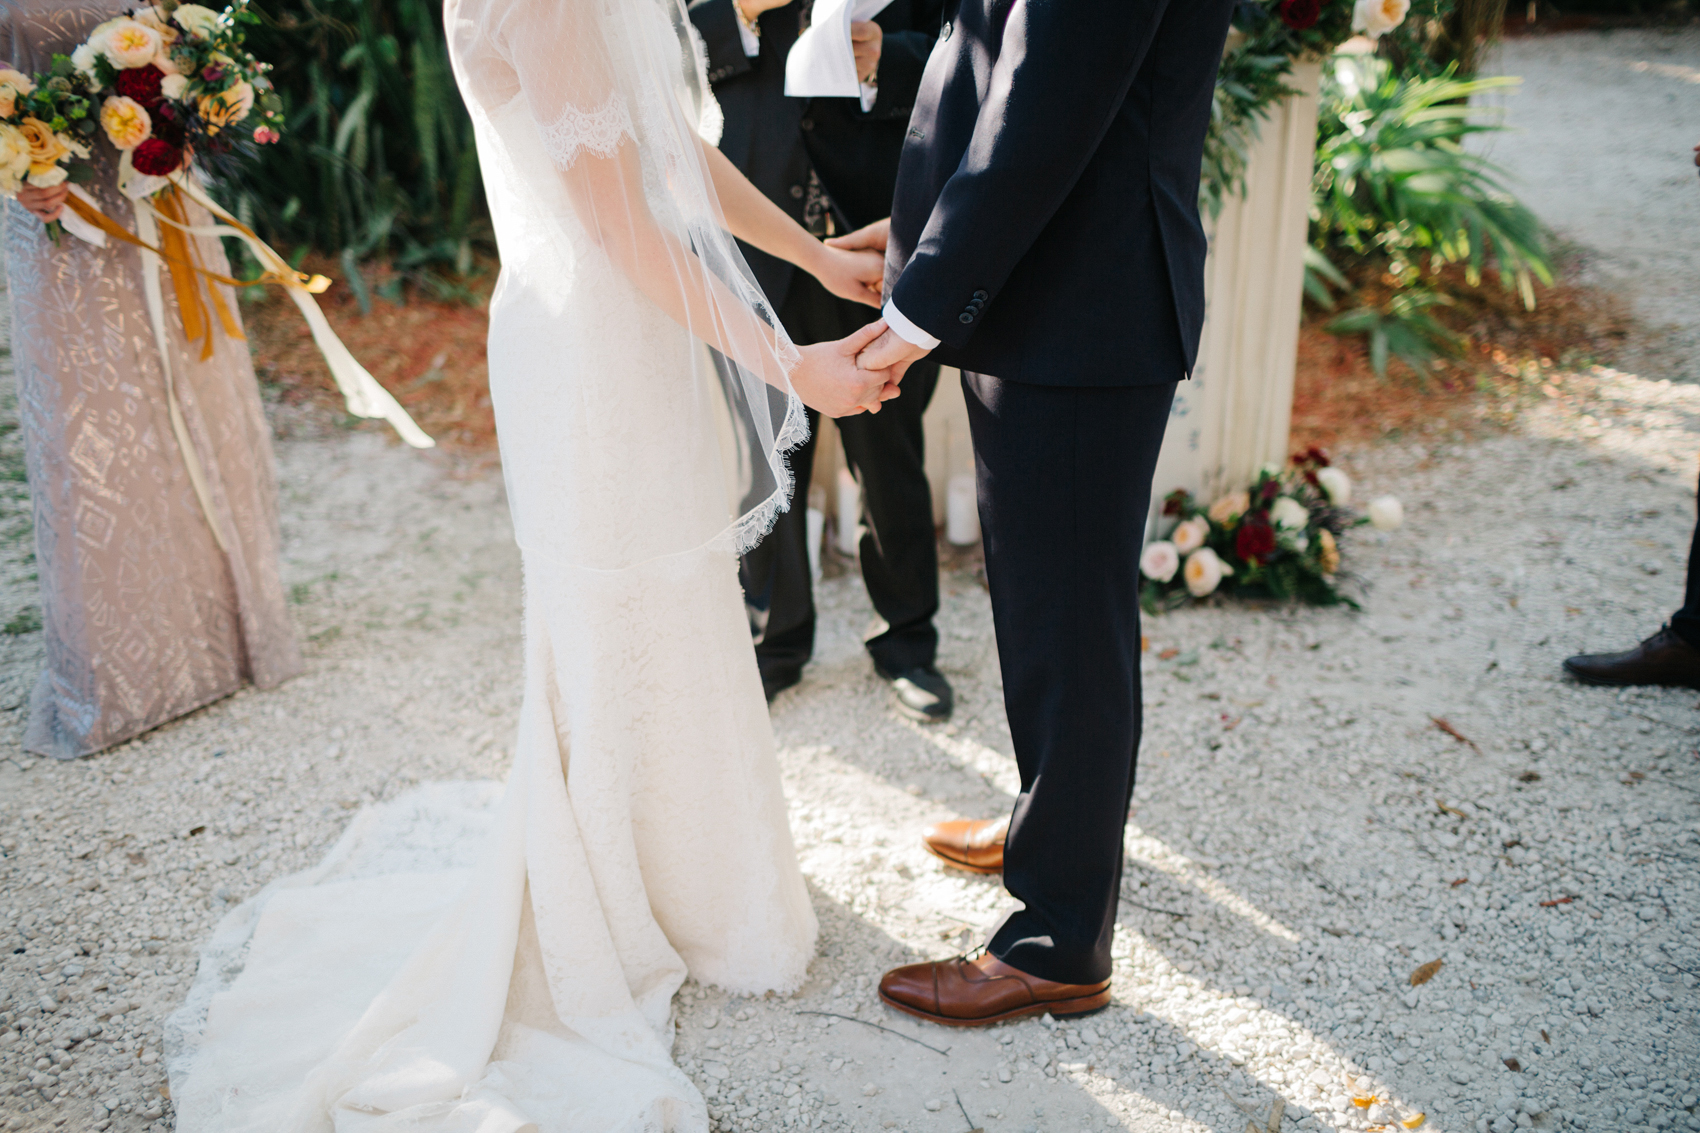 Bride and groom holding hands during the cermeony